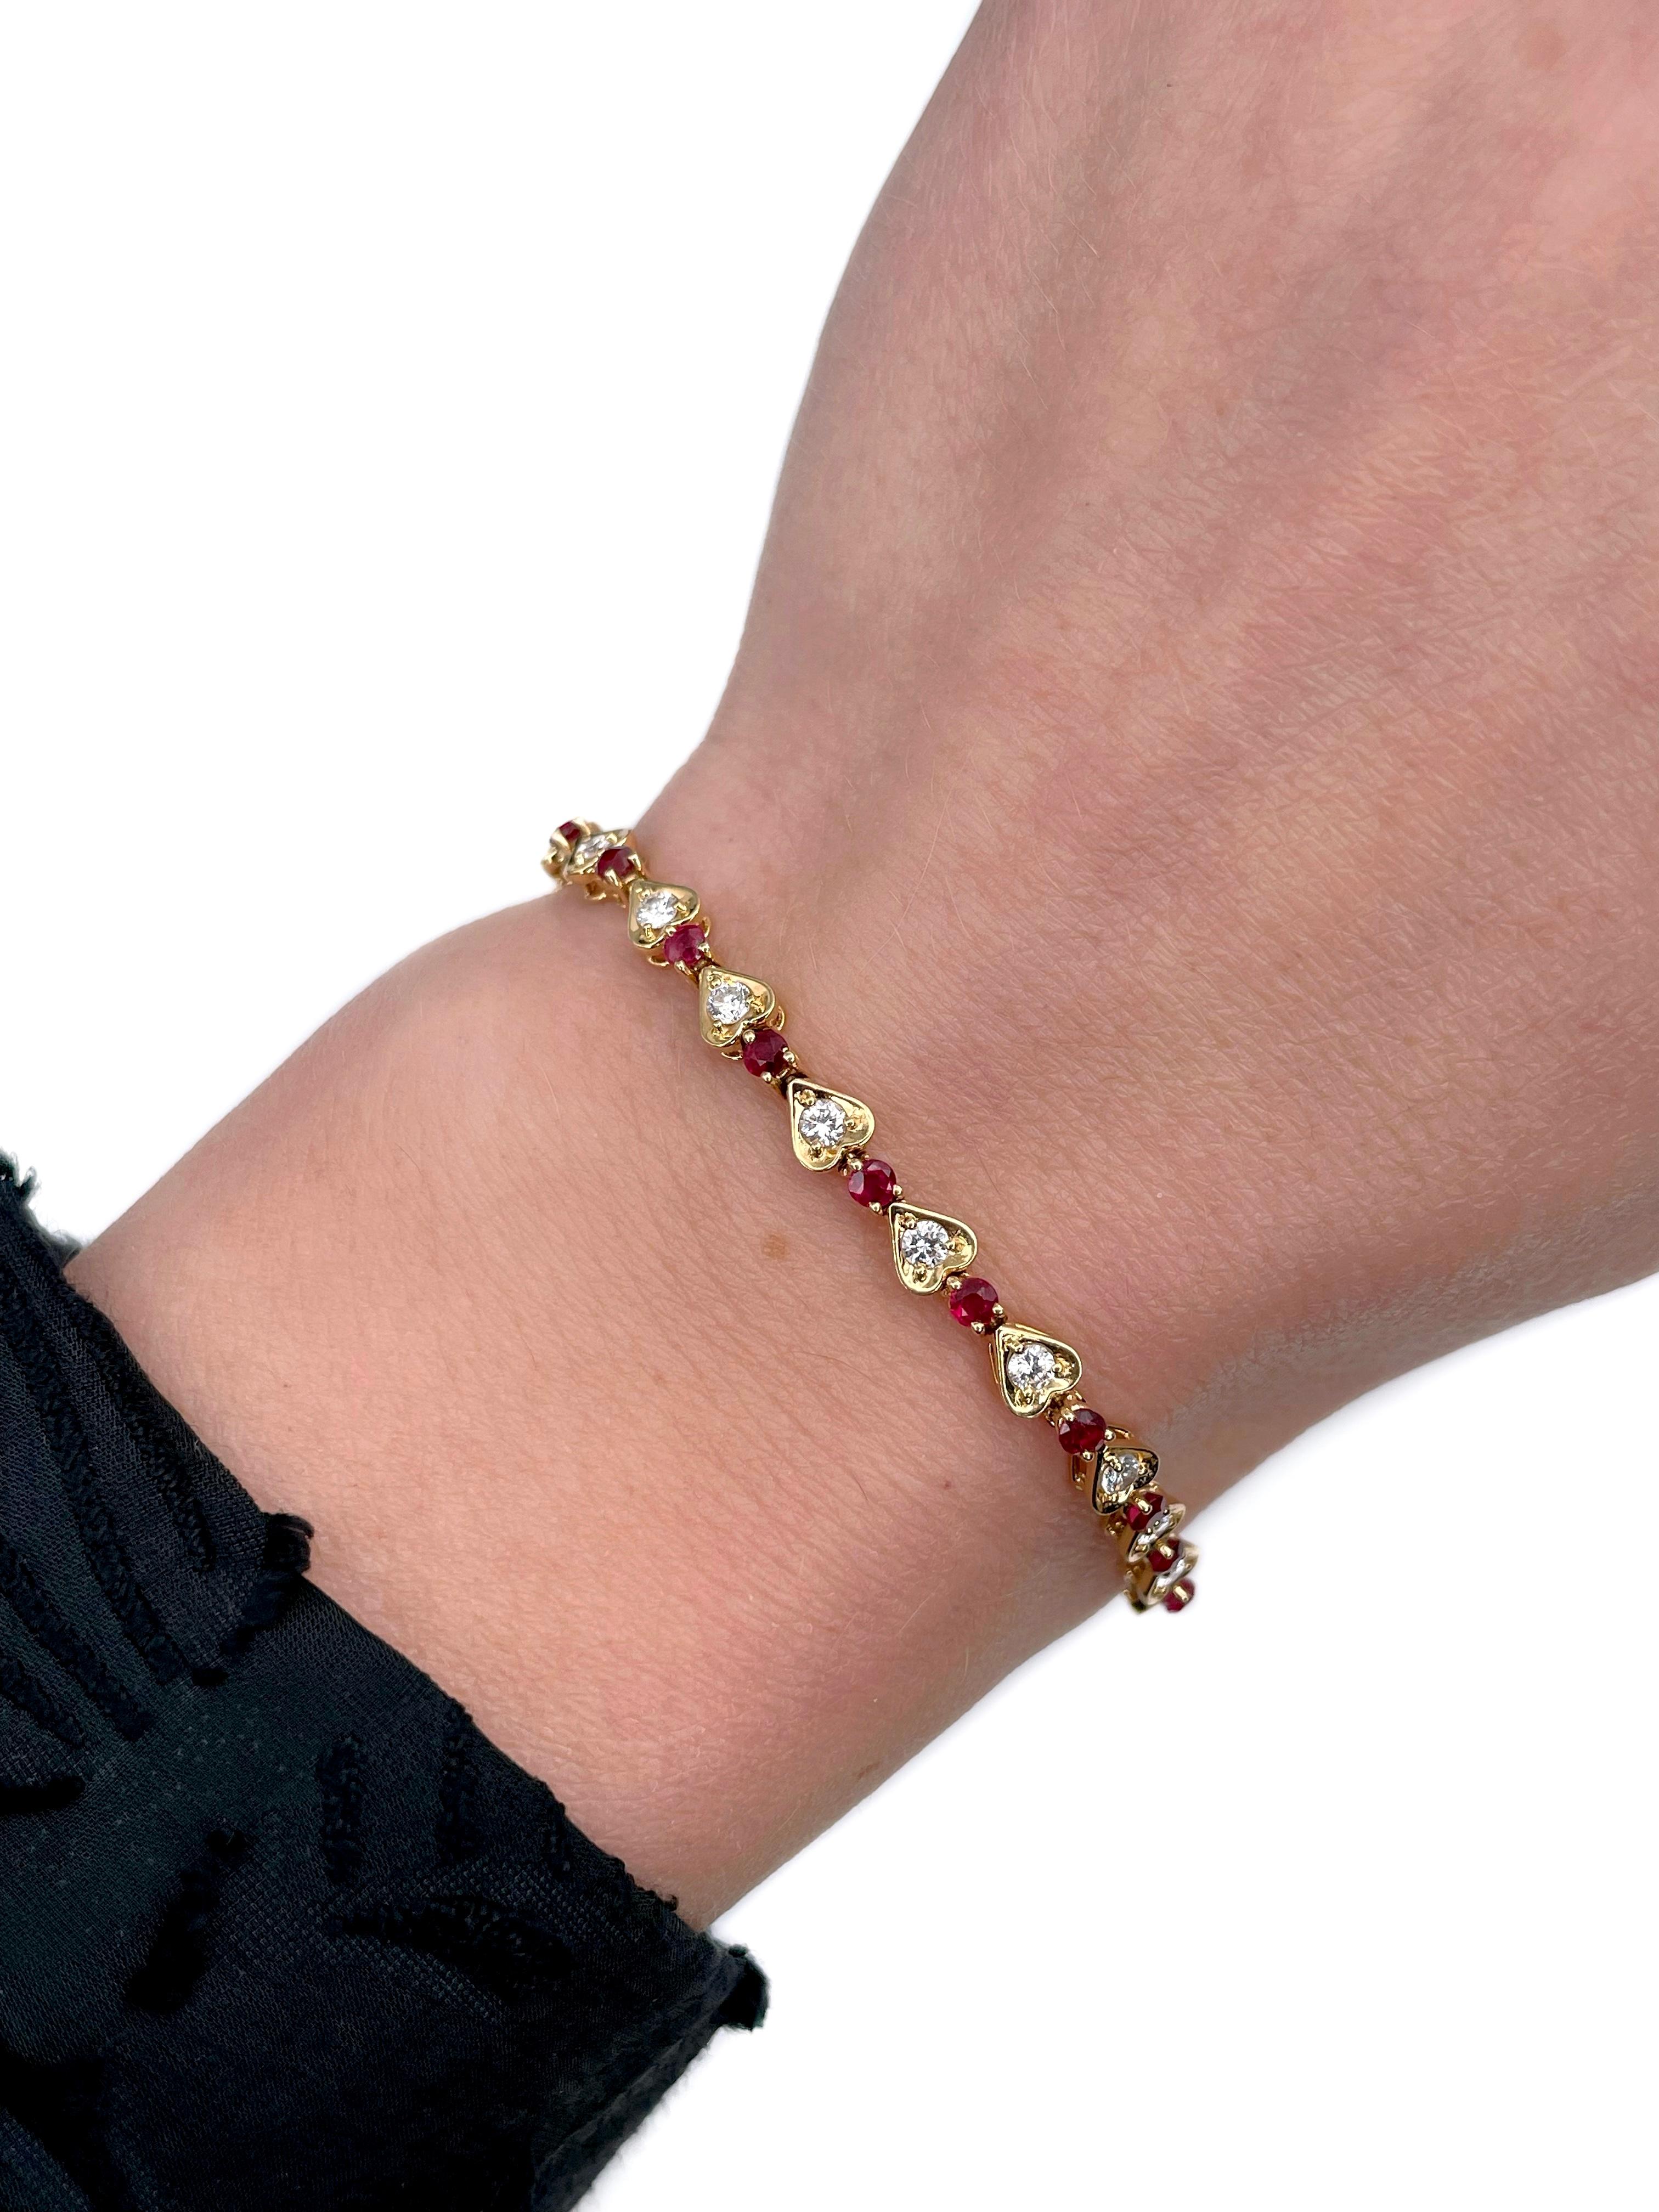 This is a vintage heart motif tennis bracelet crafted in 18K yellow gold. Circa 1990. 

The piece features:
- 22 rubies, round cut, TW 1.50ct, slpR 6/4, VS-SI
- 22 diamonds, brilliant cut, TW 1.10ct, EW-RW+, VVS-VS

Weight: 8.90g
Length: